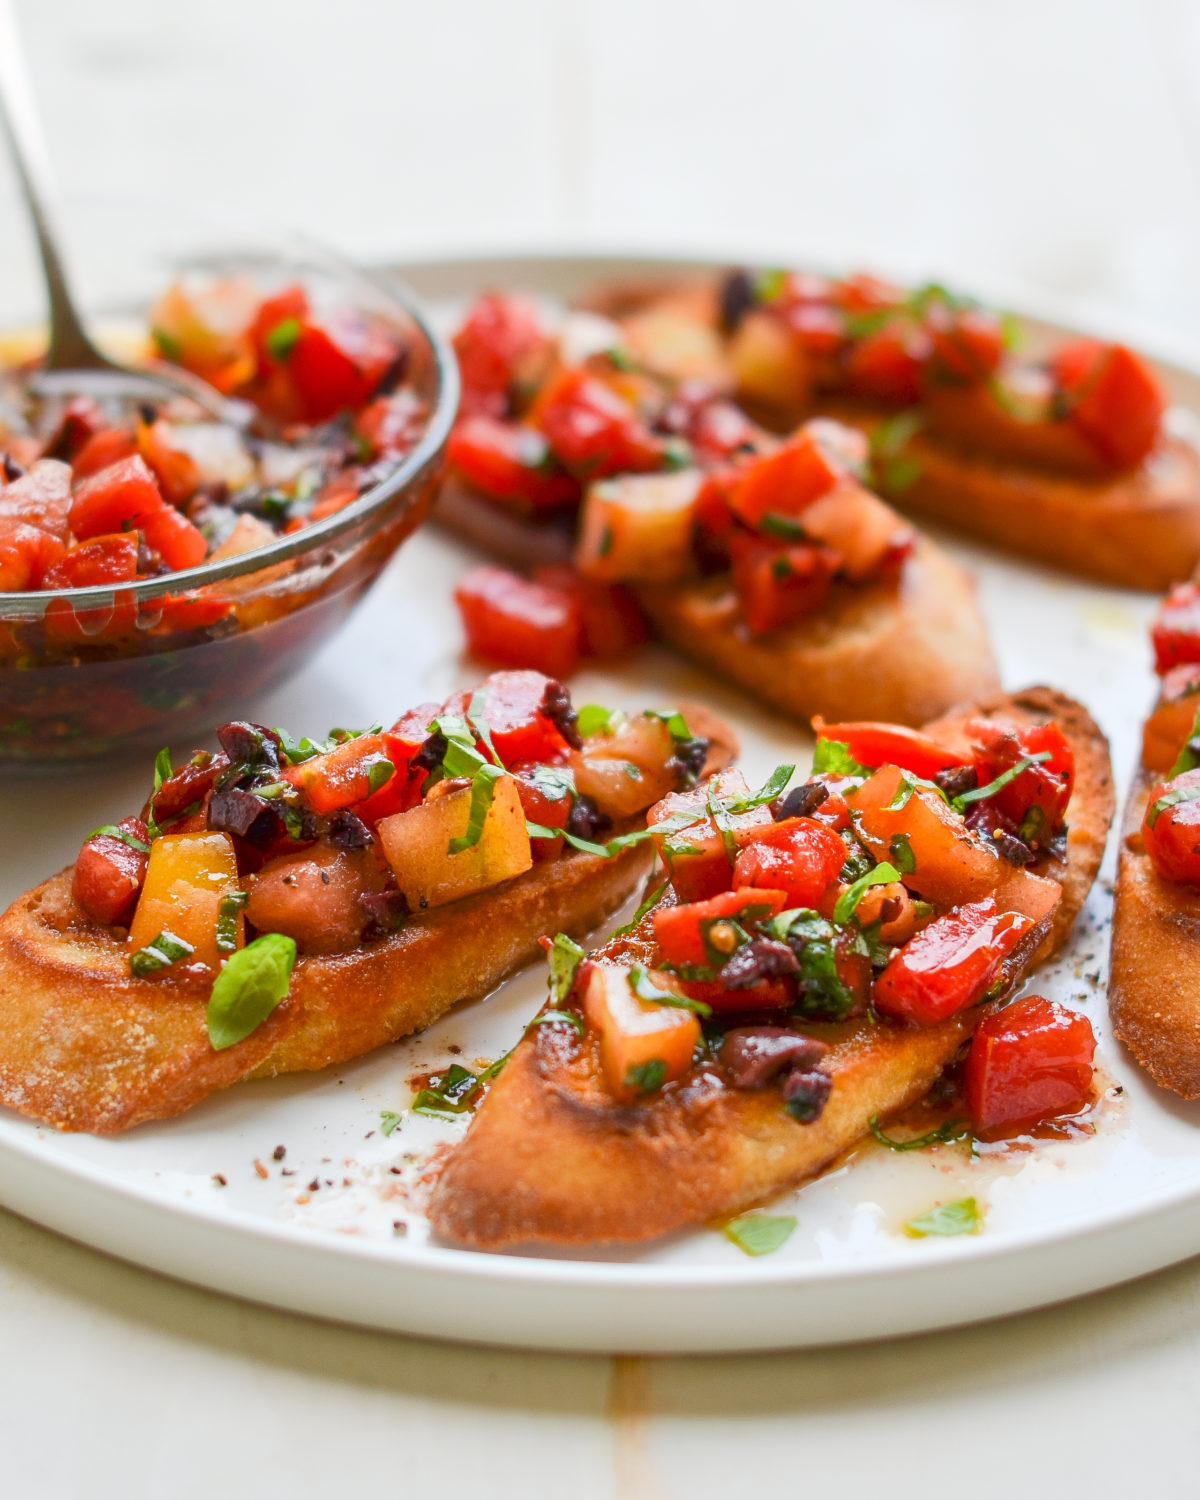 Bruschetta with Heirloom Tomatoes, Olives and Basil image